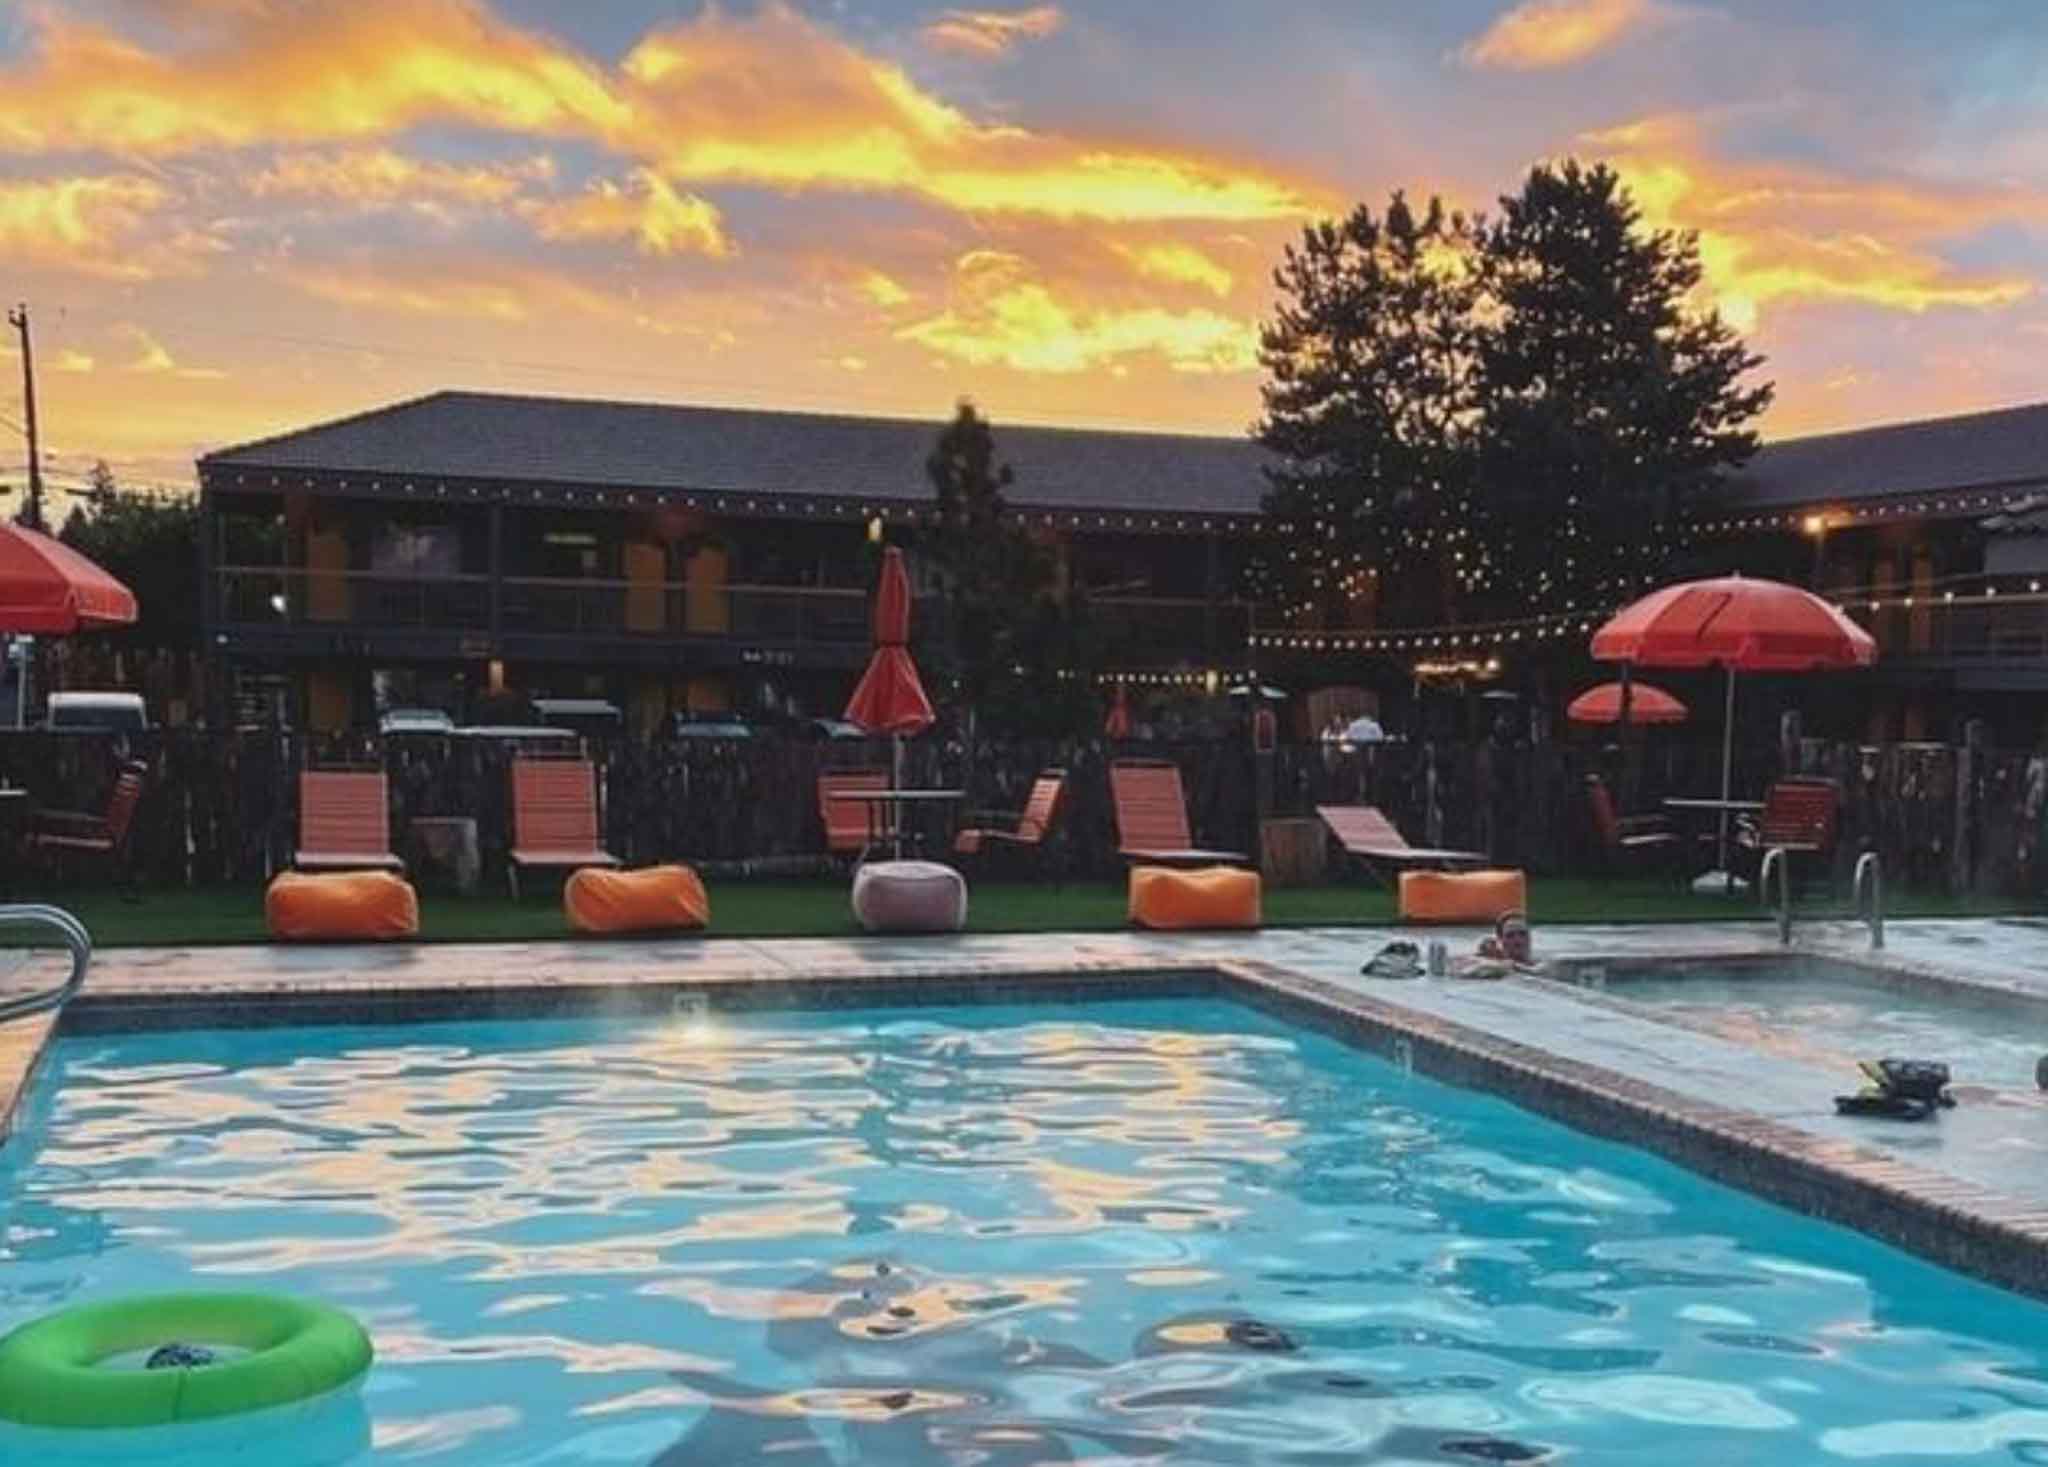 sun sets over a summer sky and pool lined with orange chairs and umbrellas